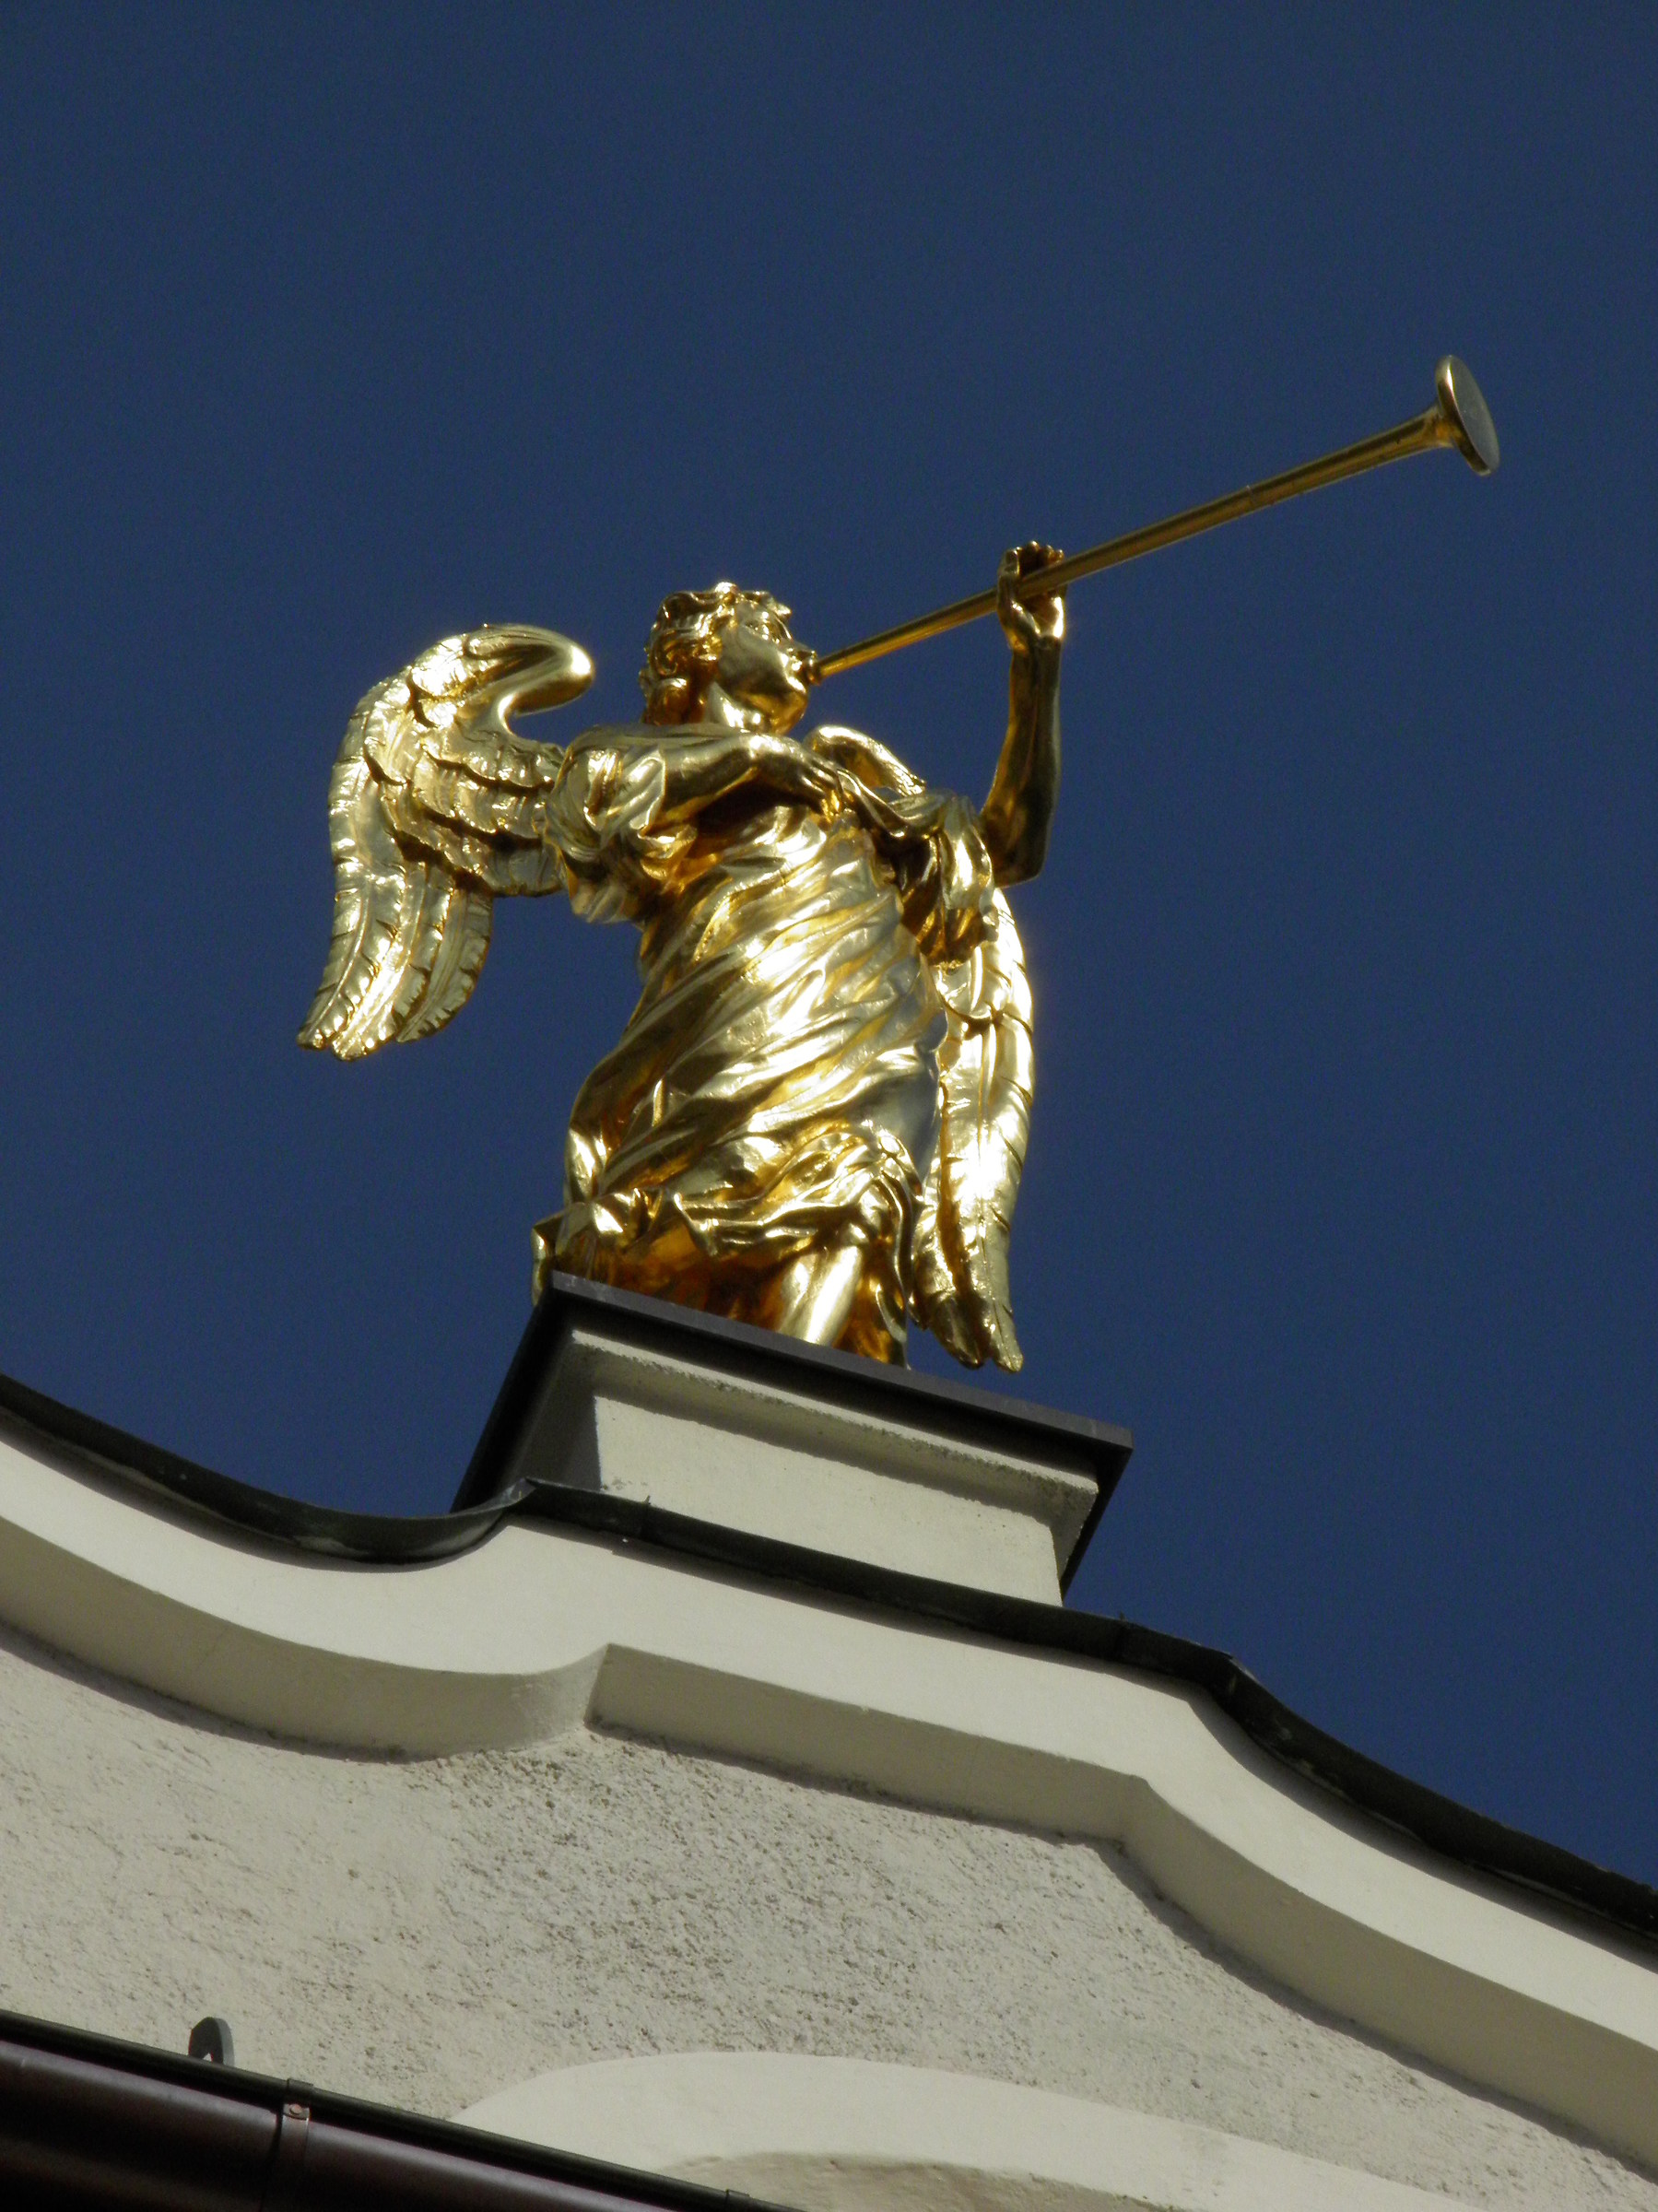 The angel blew his trumpet (San Candido - Bz)...